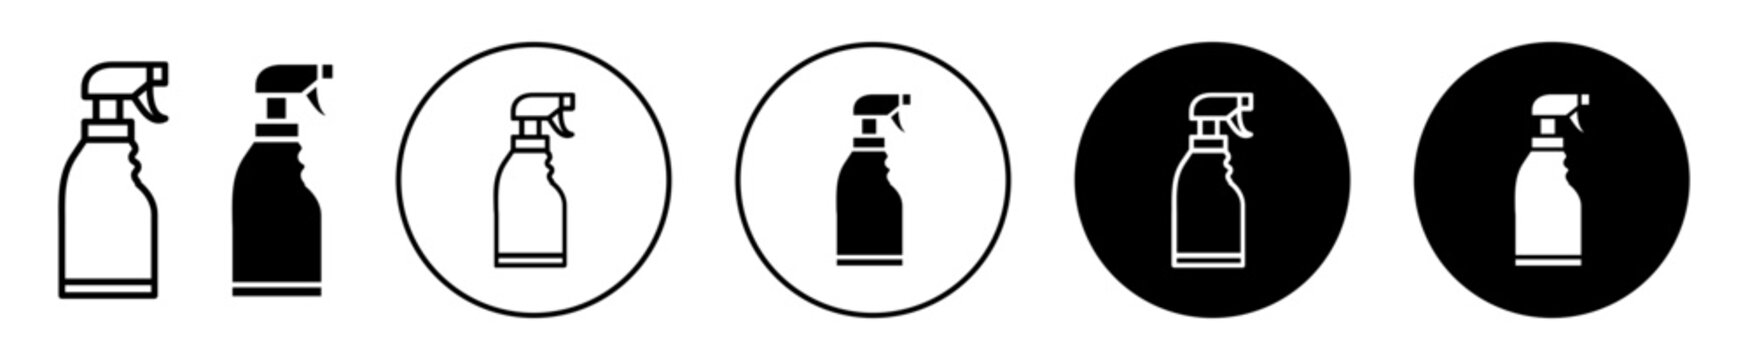 Cleaning spray icon. household kitchen floor or laundry cleaner detergent softener laundromat plastic trigger bottle with pump symbol. cleaning spray product with hand sprayer vector set sign. 